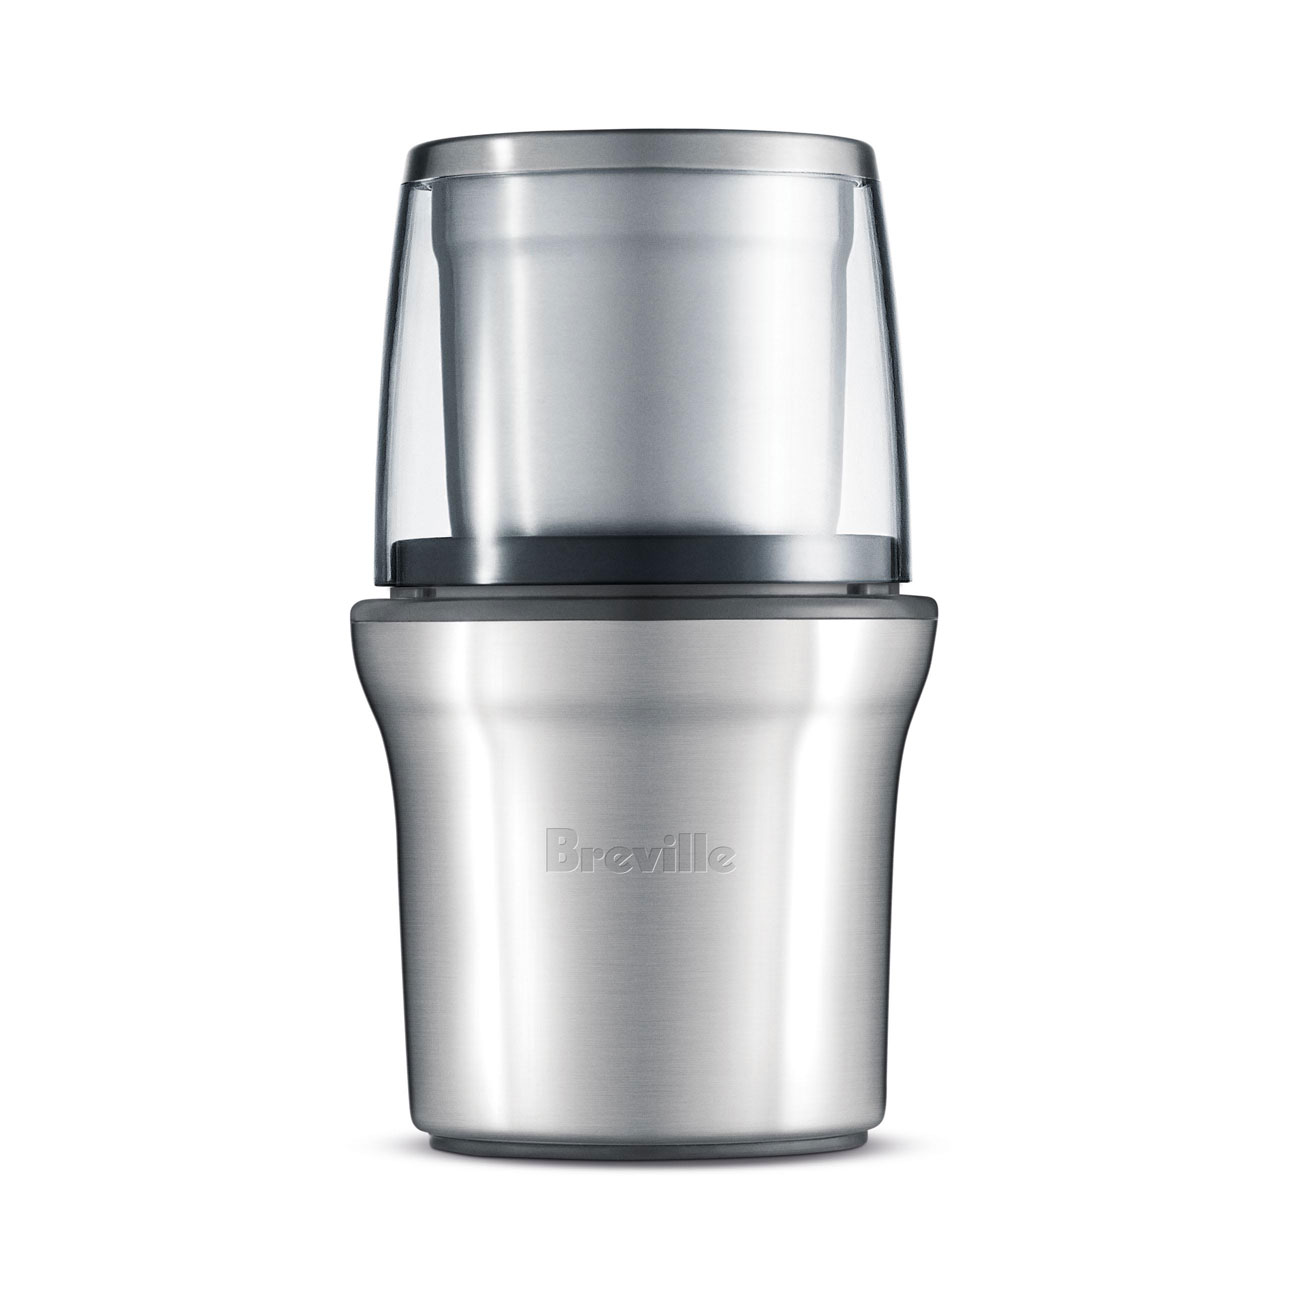 The Coffee Spice Coffee Grinder Breville